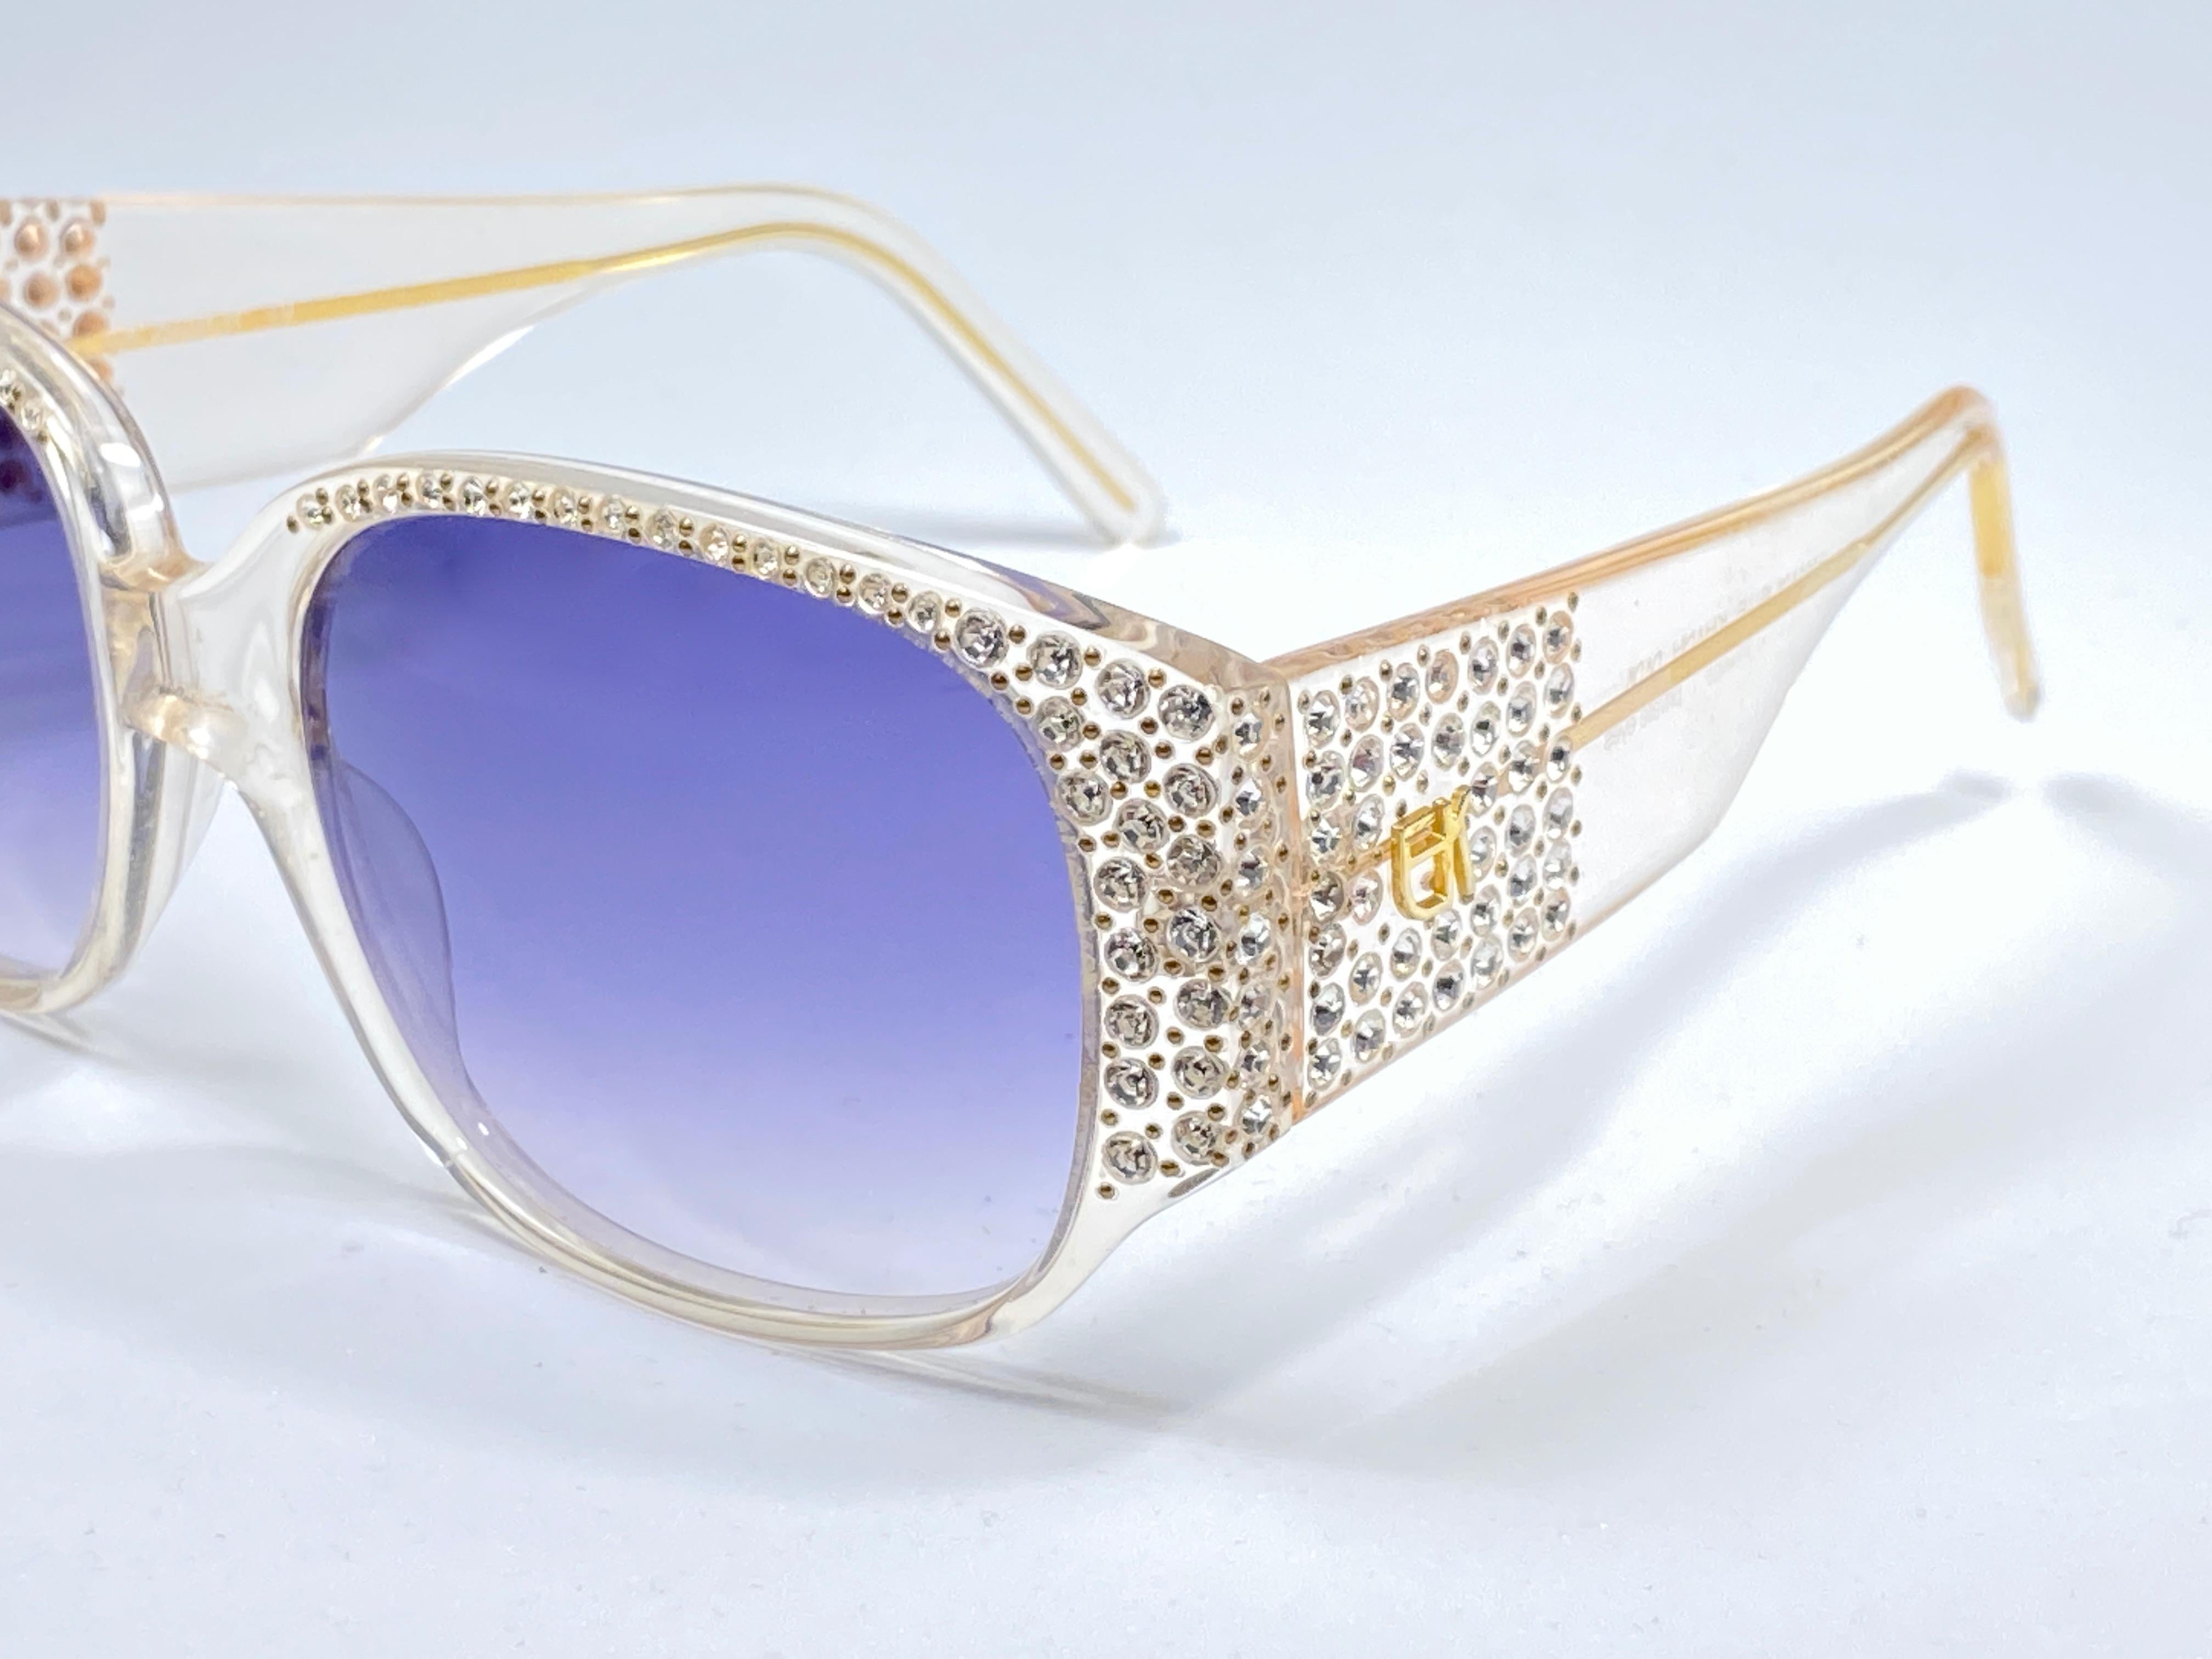 New Vintage Emmanuelle Khahn rhinestones detailed frame with spotless light lenses.  Made in Paris. 
Produced and design in 1980's.  

New, never worn or displayed. Please consider this item is nearly 40 years old and could show minor sign of wear